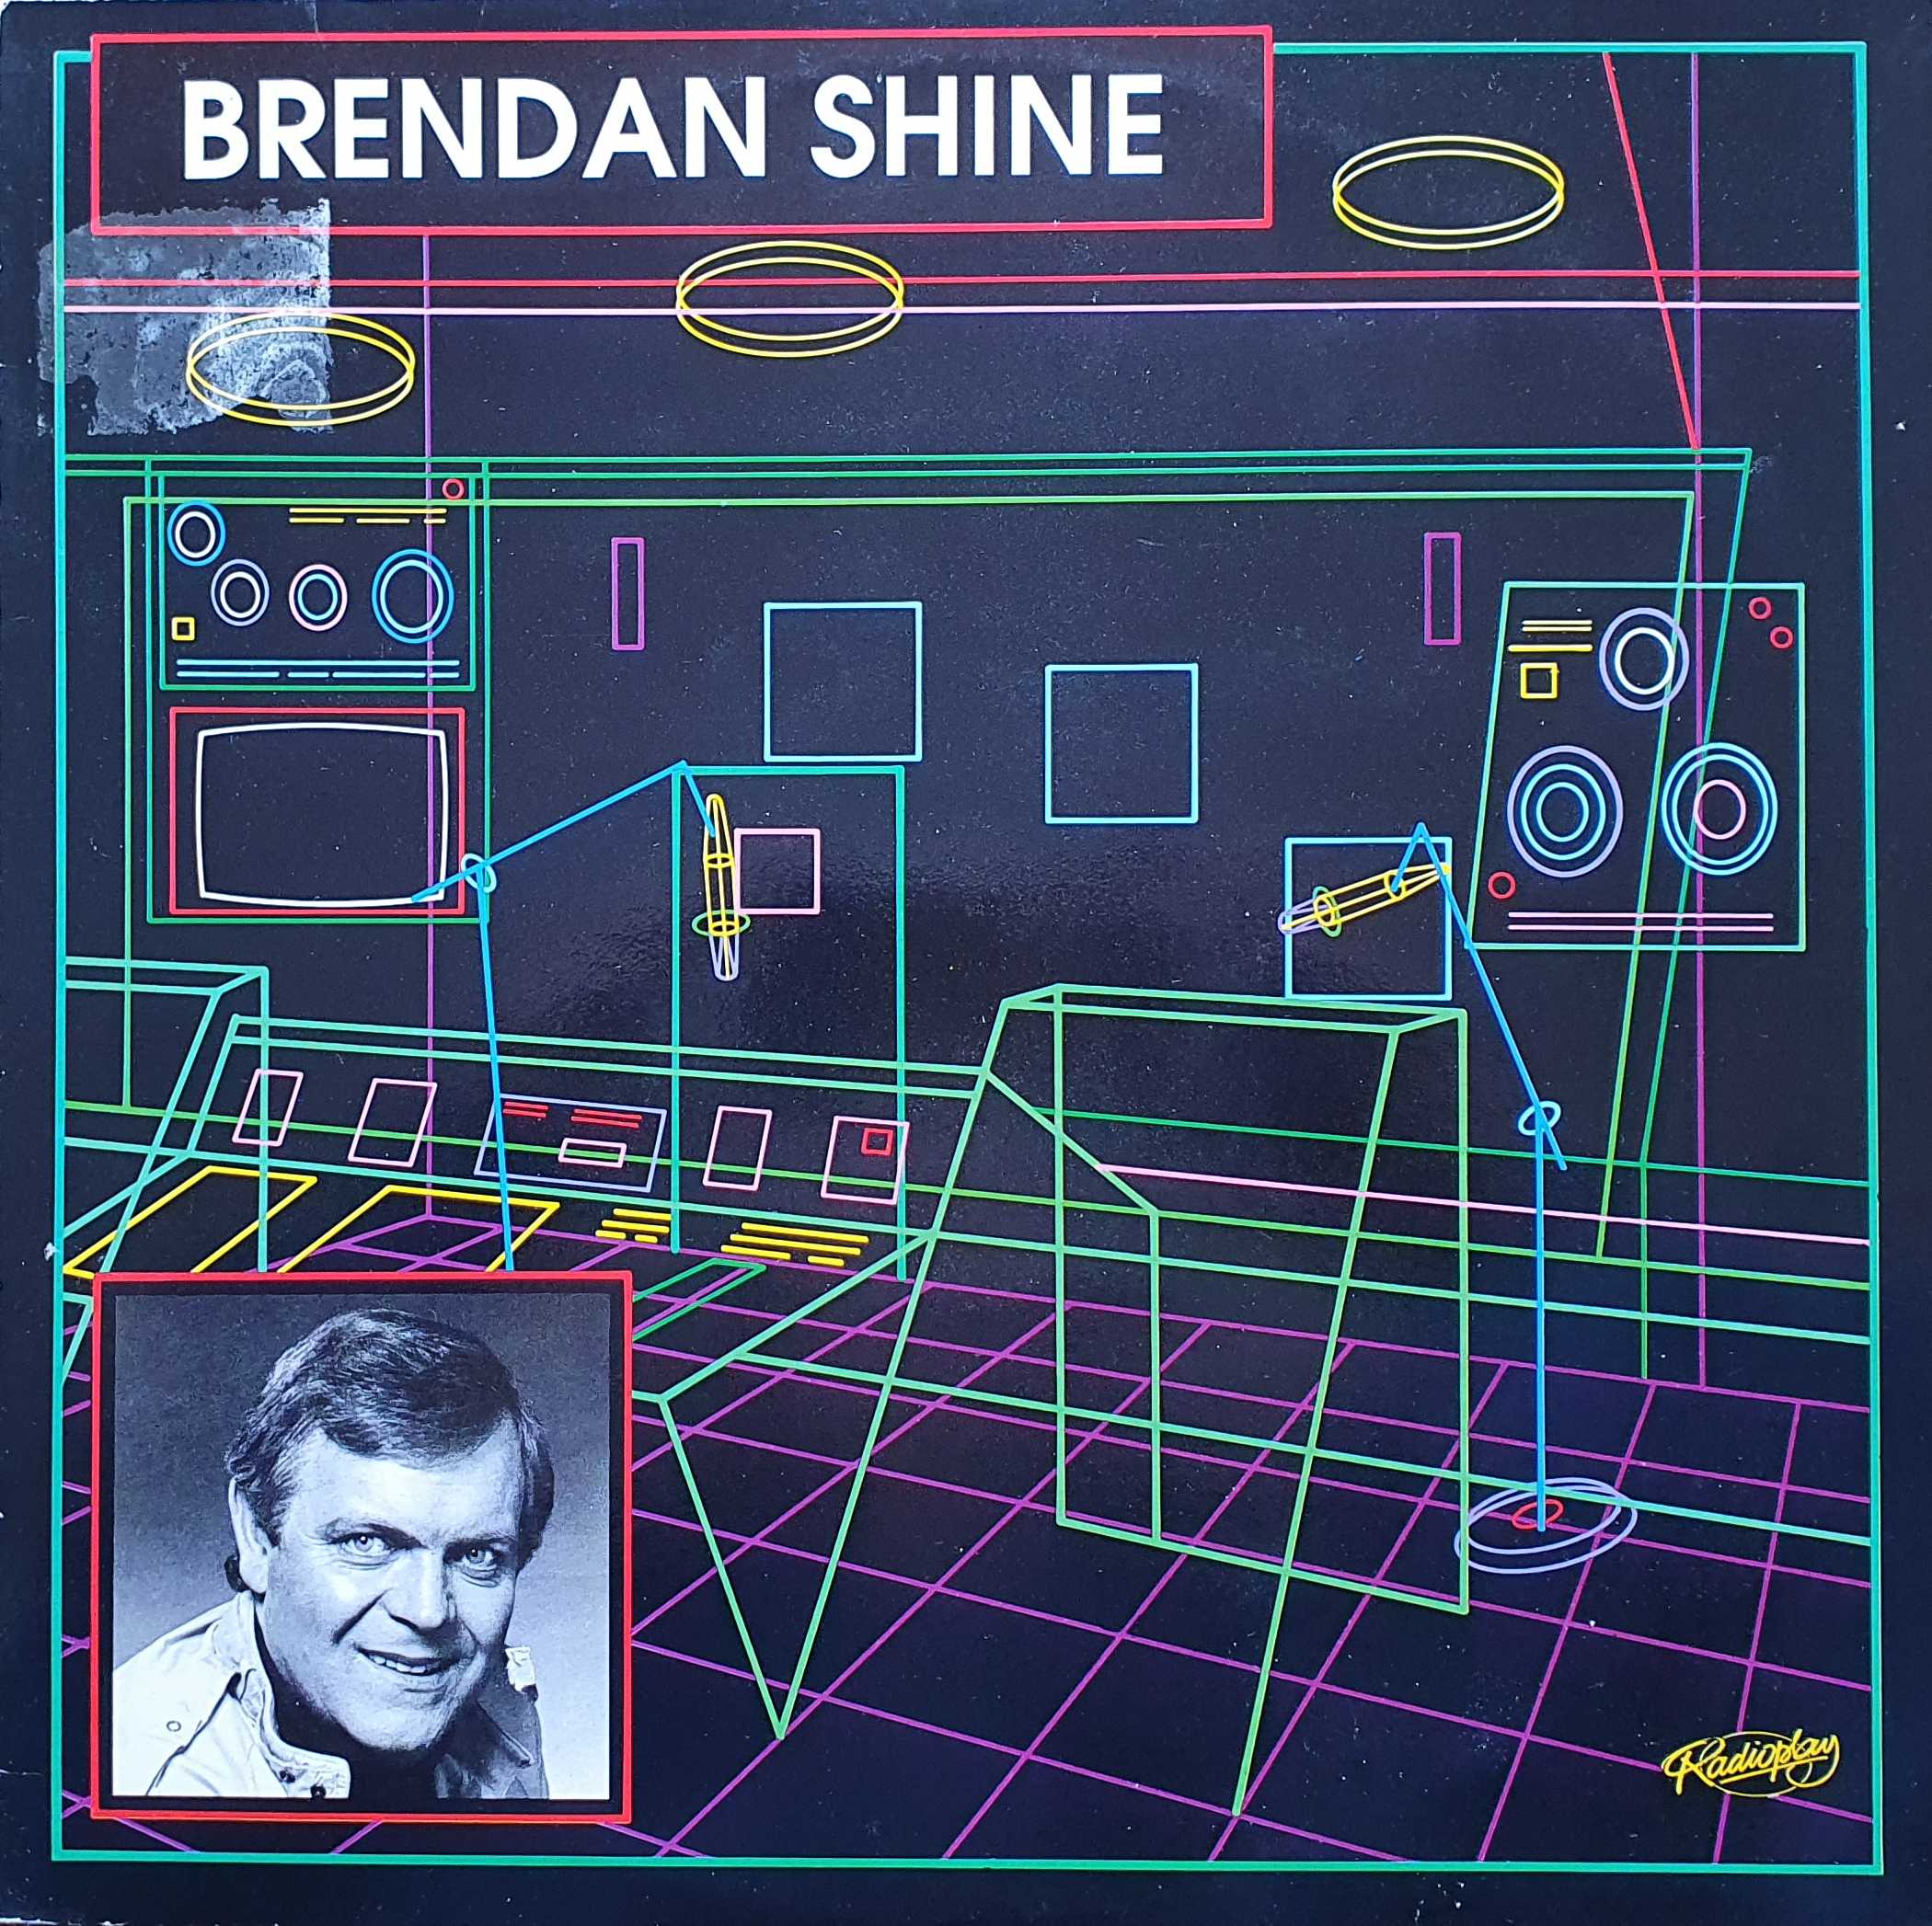 Picture of TAIR 87064 Brendan Shine album by artist Brendan Shine from the BBC records and Tapes library